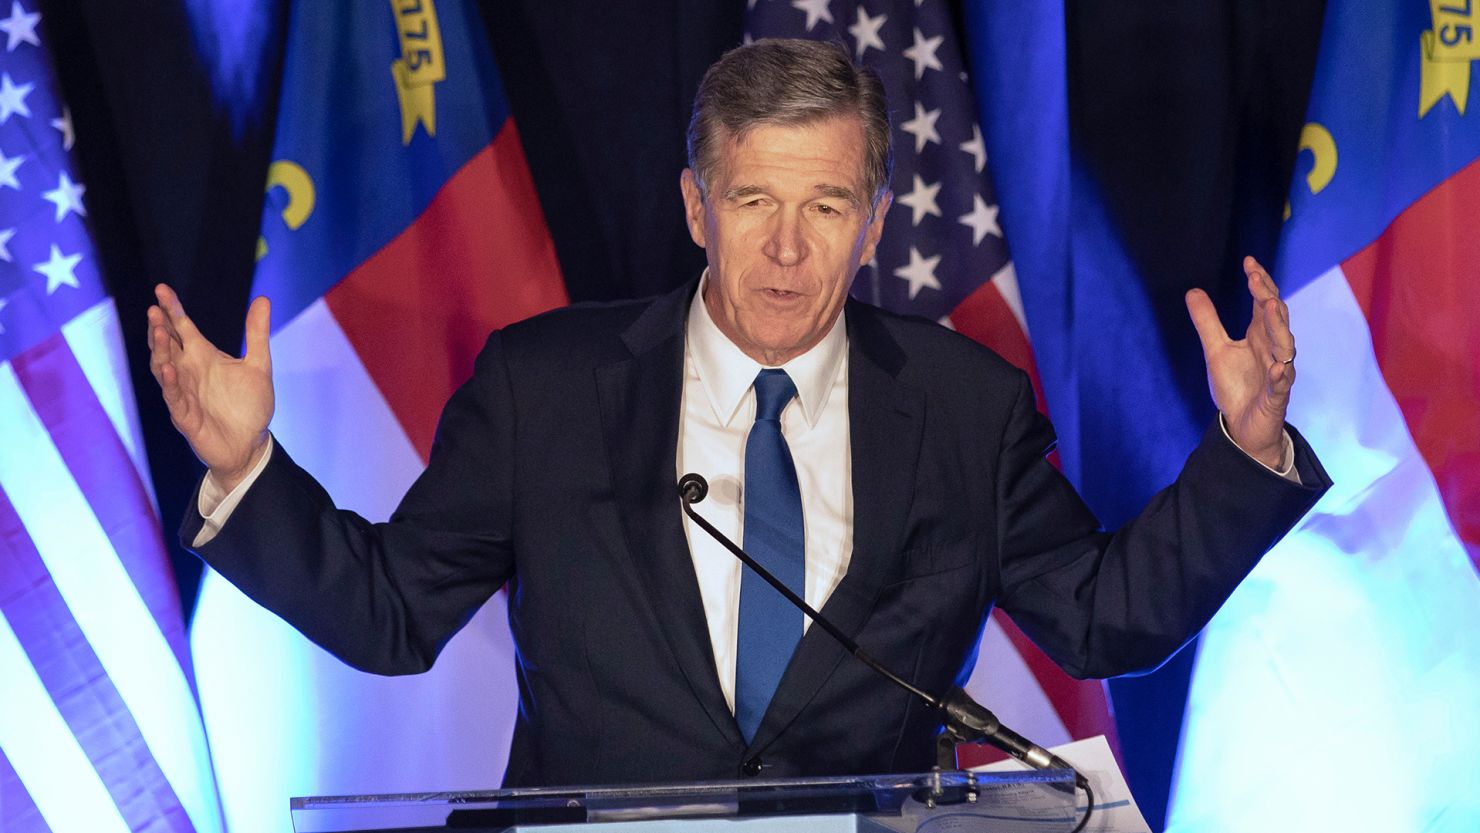 North Carolina Gov. Roy Cooper said he will soon sign the Medicaid expansion bill that the state legislature approved.